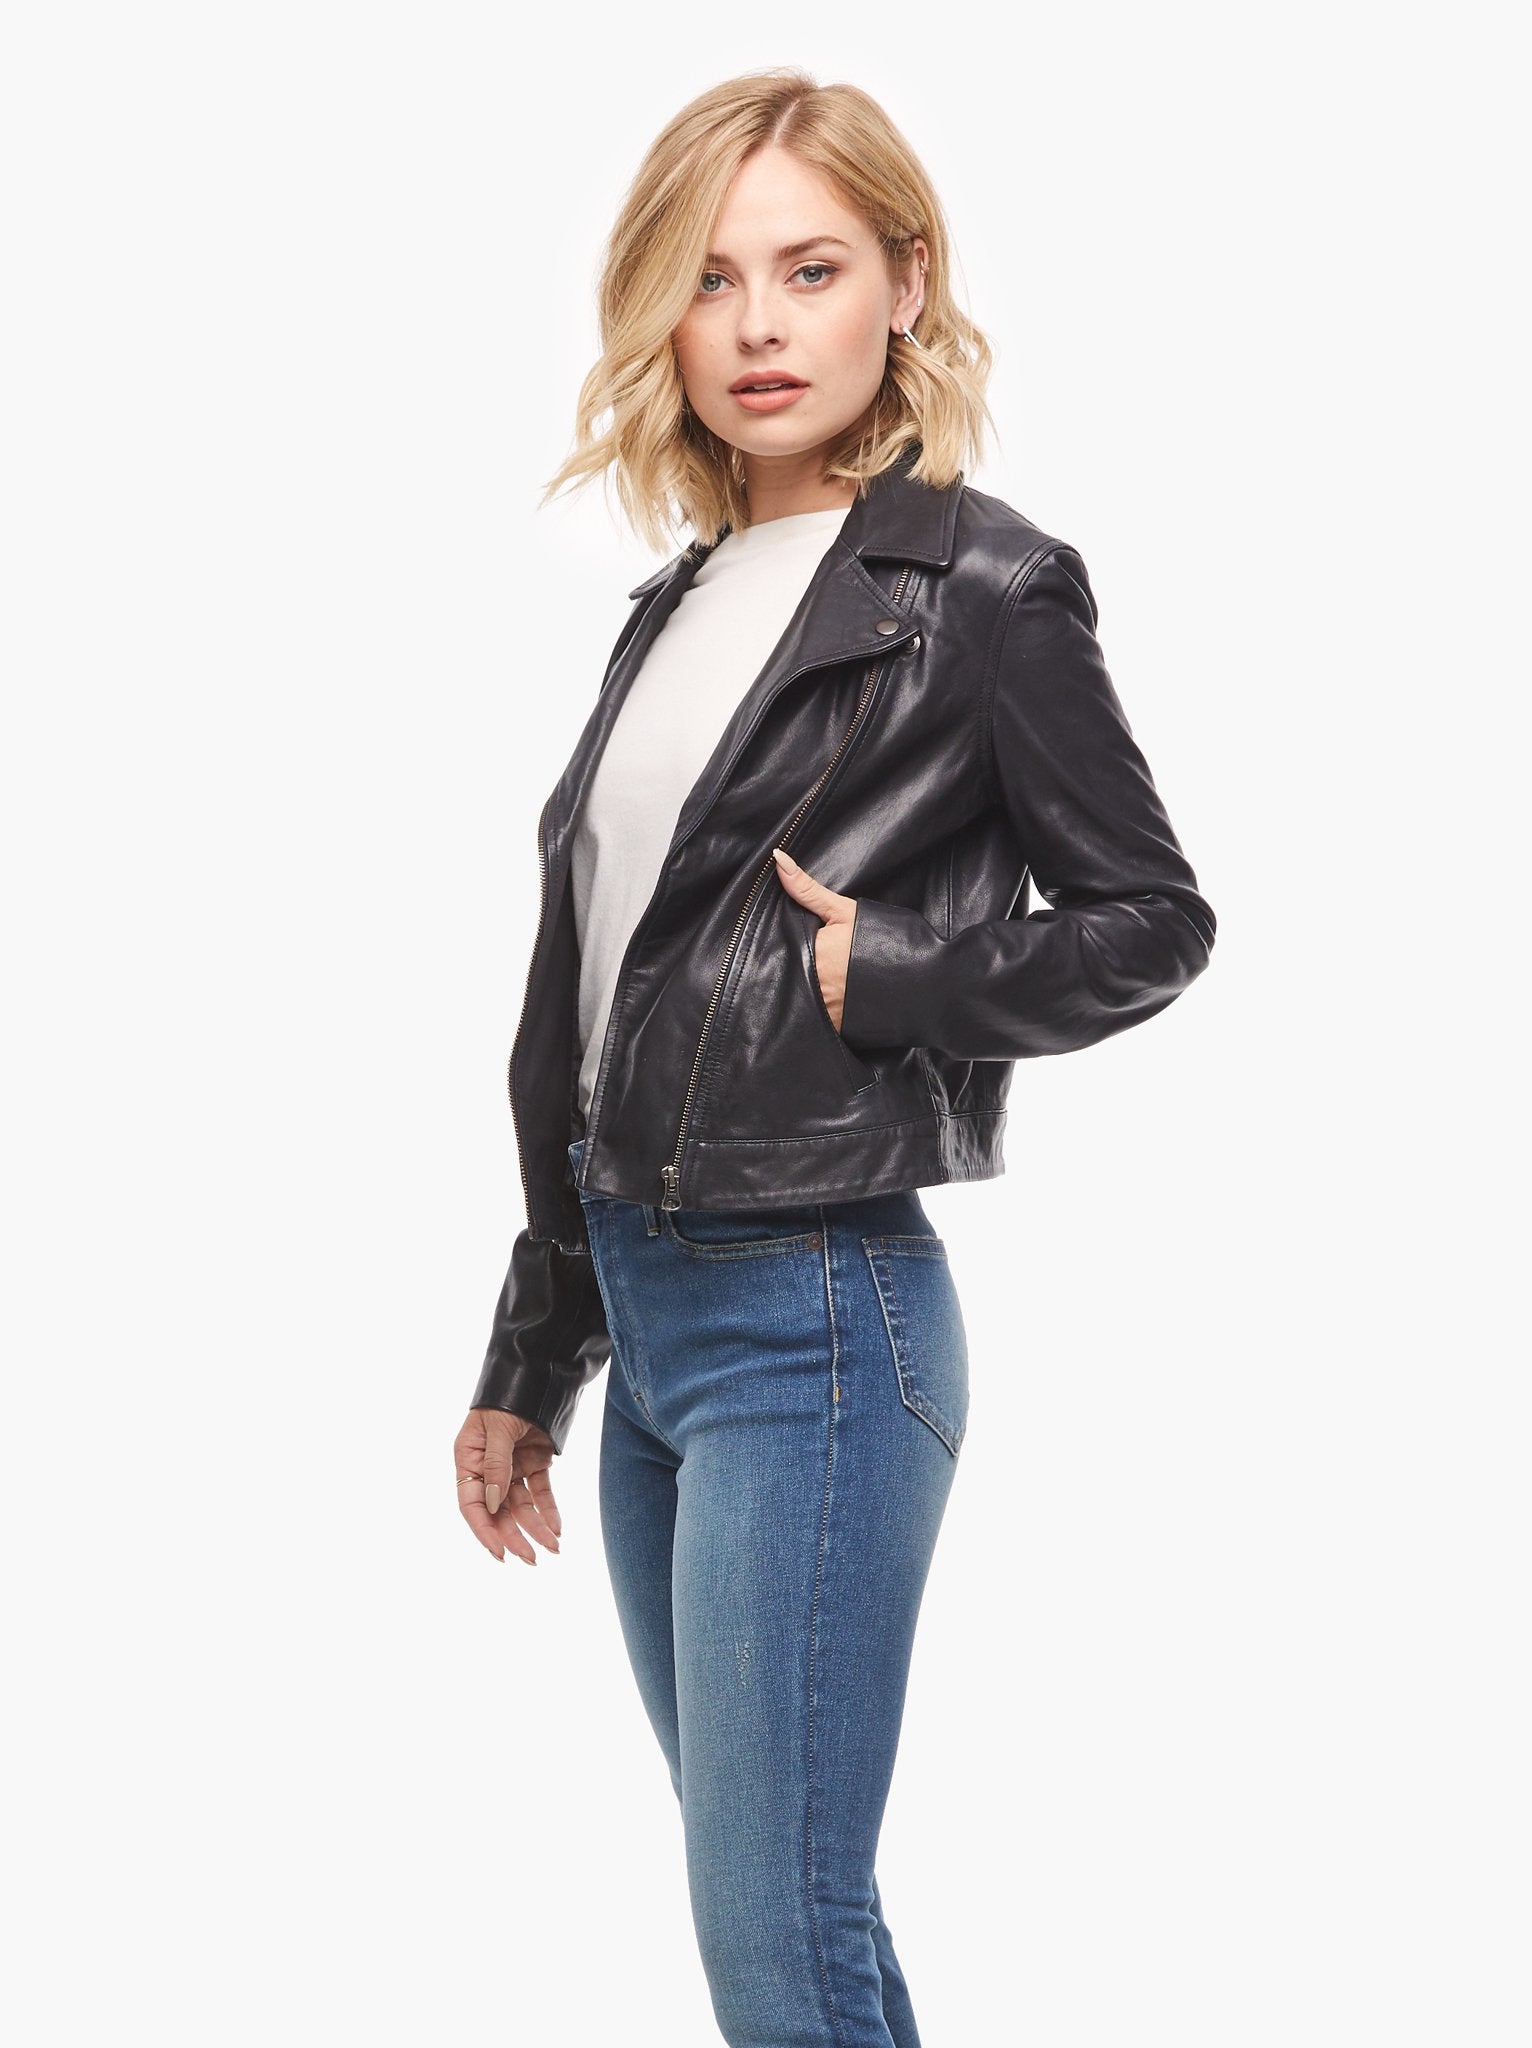 Is ABLE's Maha Leather Jacket Worth It? An Honest Review + A Discount Code